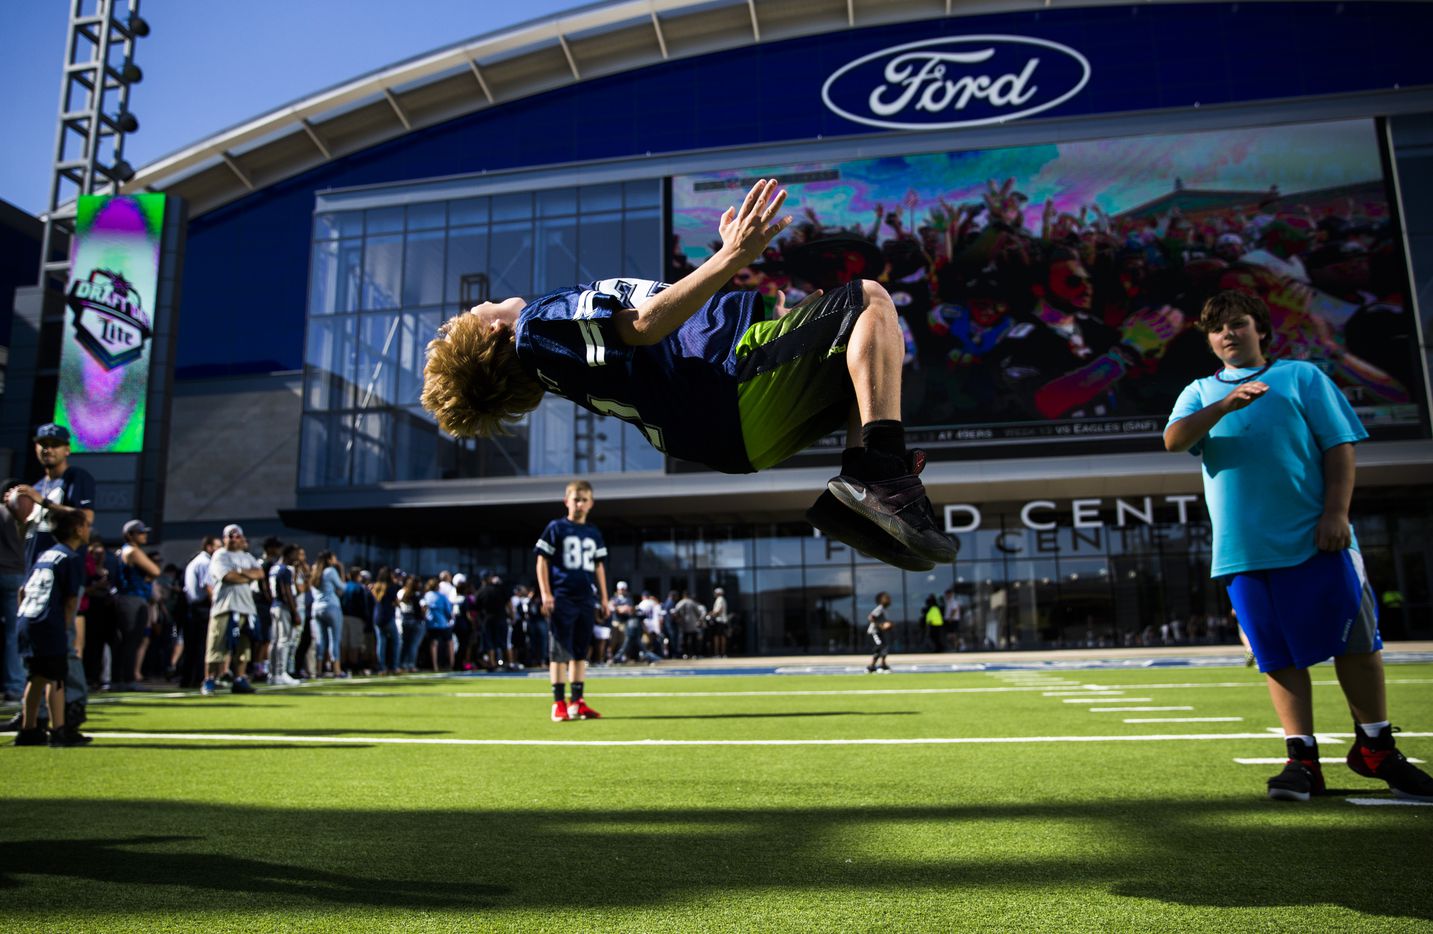 Devon Cohen, 10, does a backflip outside the Dallas Cowboys' 2017 NFL Draft Party on Thursday, April 27, 2017, at The Star in Frisco, Texas. 